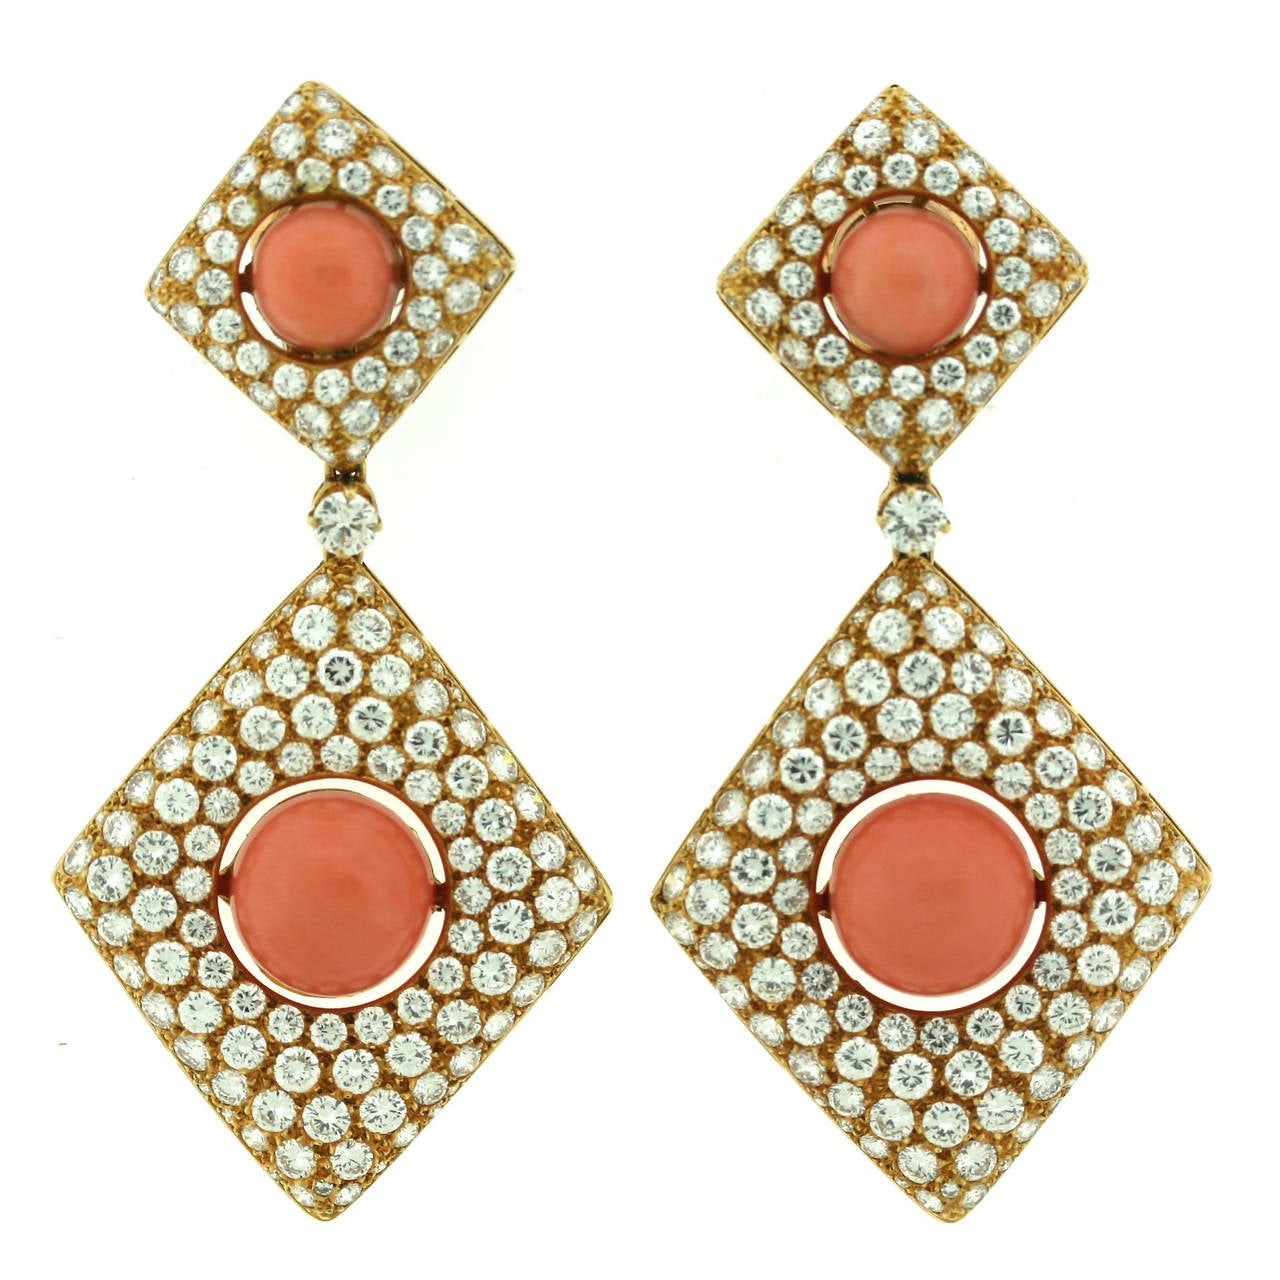 An Important Pair of Van Cleef & Arpels Coral and Diamond Earrings For Sale